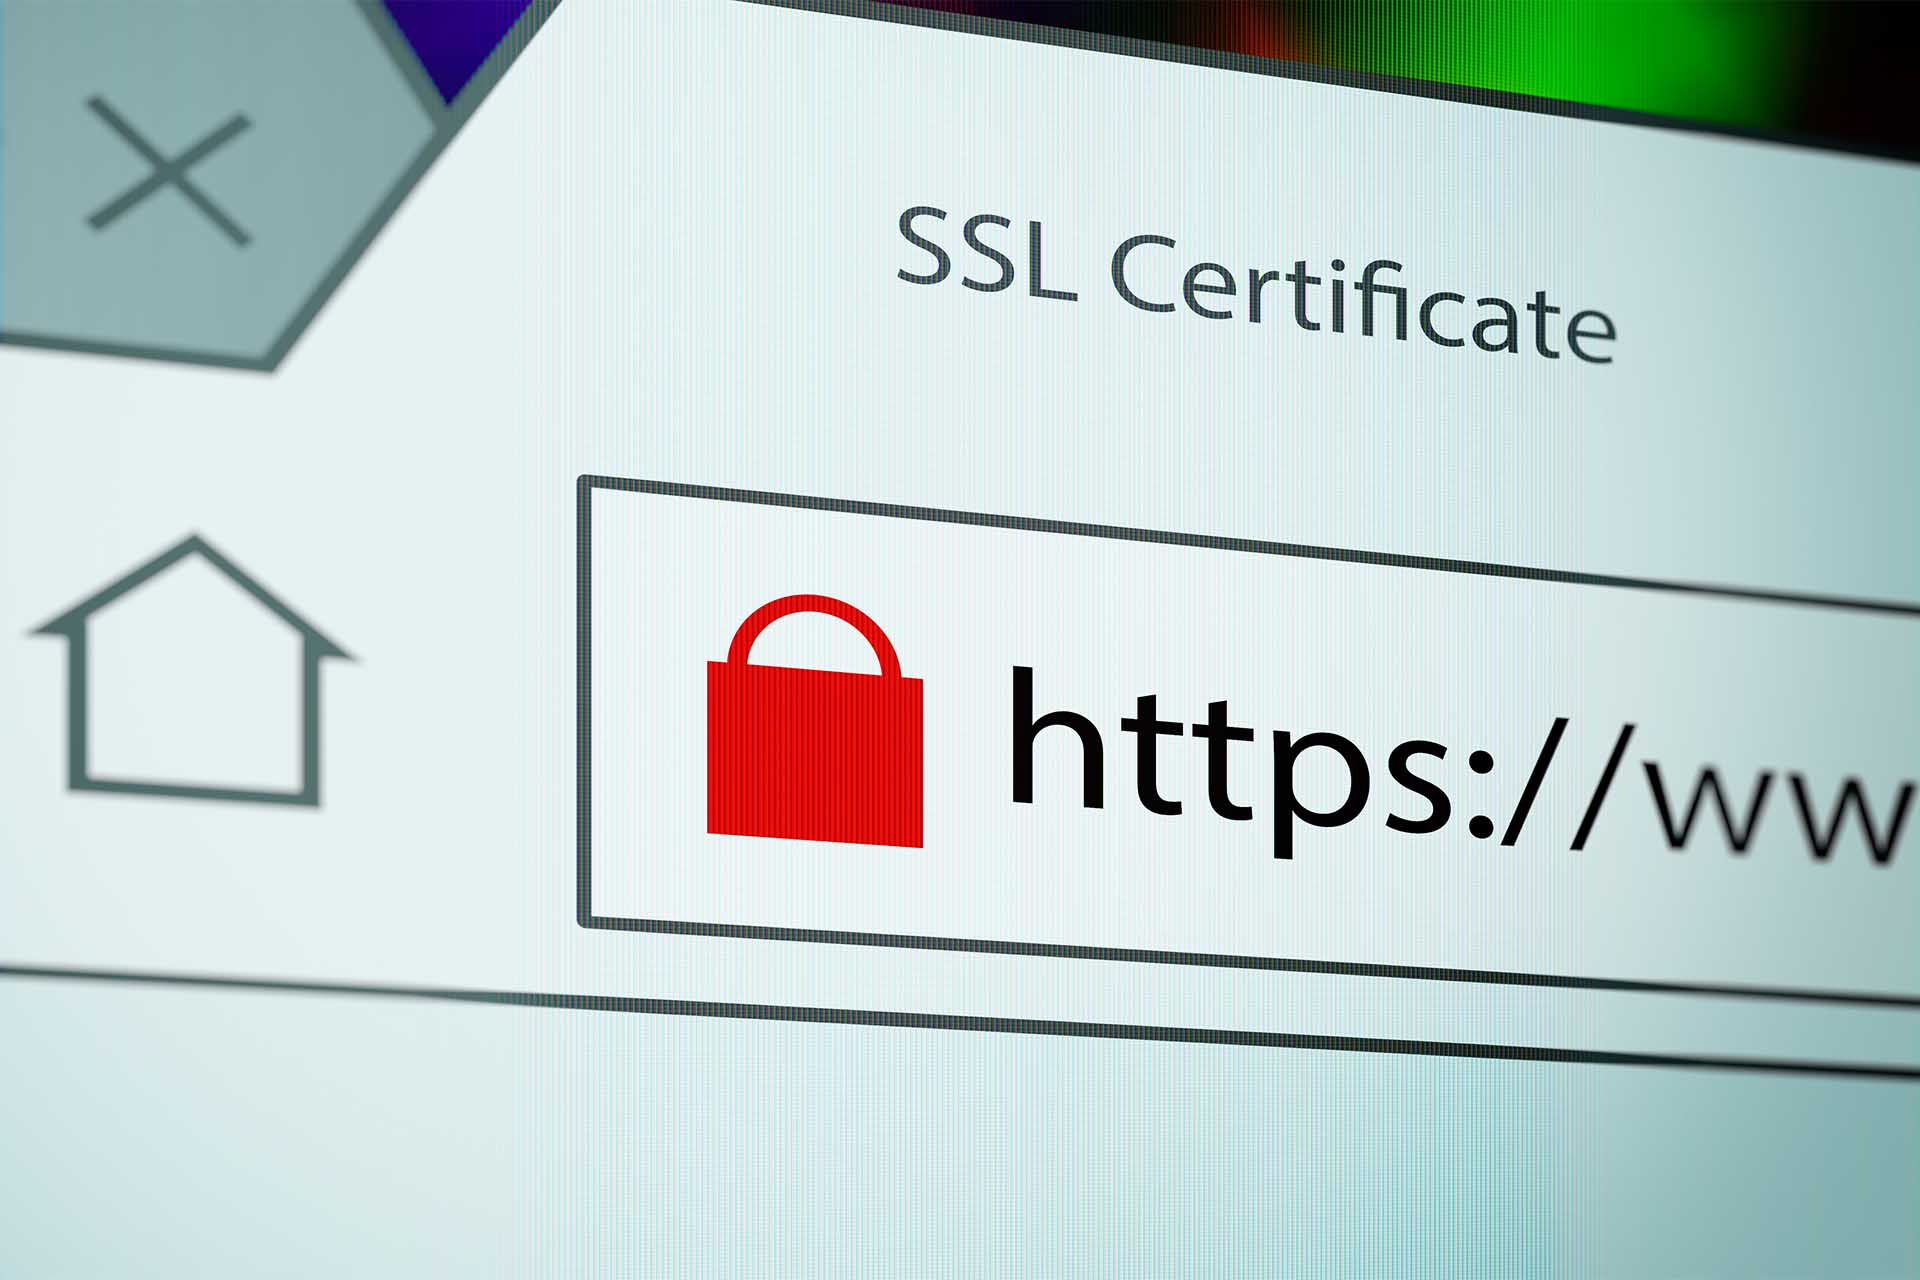 Do you need an SSL Certificate for your website?